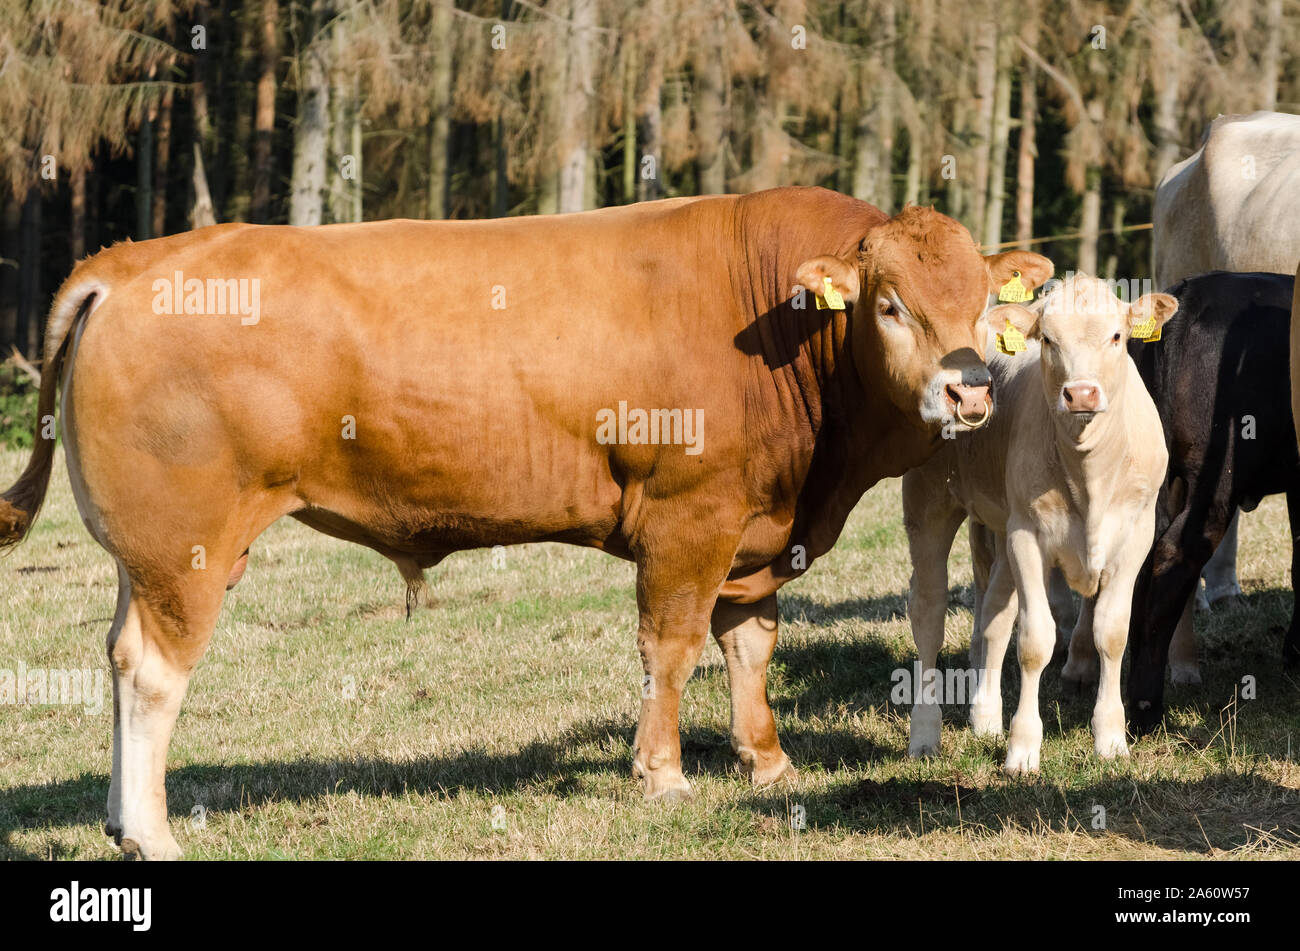 Bos taurus, Cattle on a pasture in in Germany Stock Photo Alamy